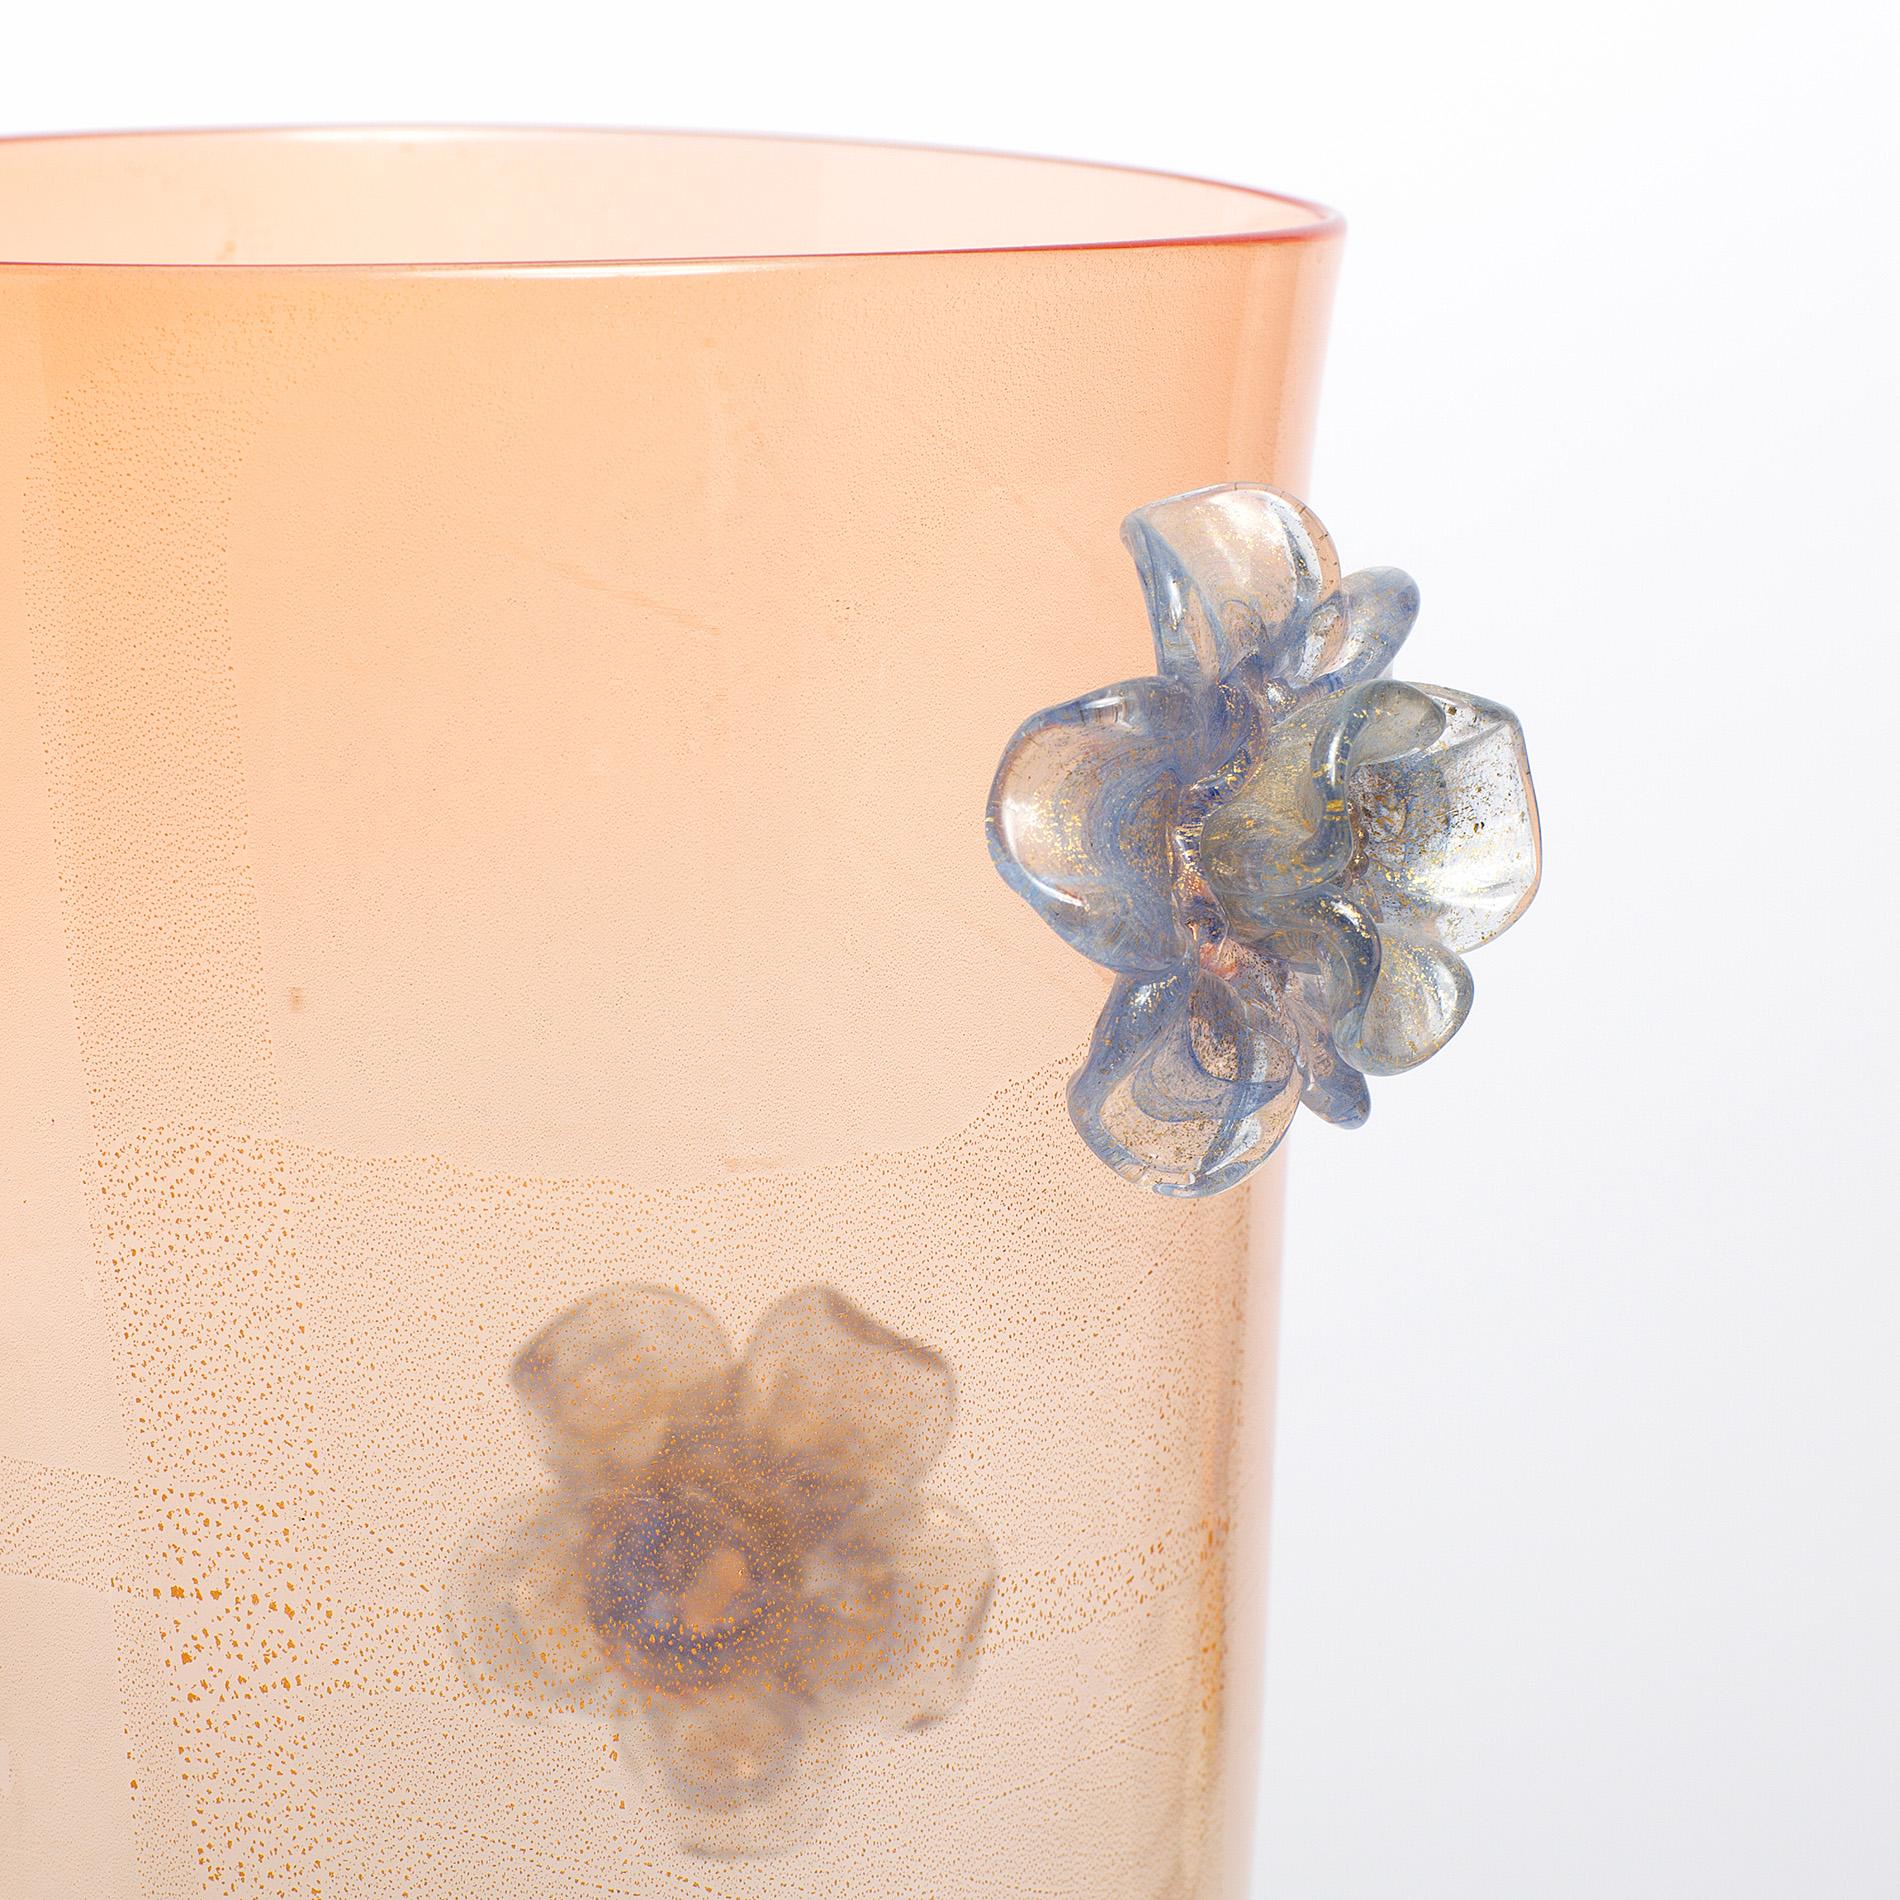 Stunning tall midcentury vase in soft peach opaque glass dotted with three impressive and intricate blue glass flowers. Equally stunning either with or without flowers.